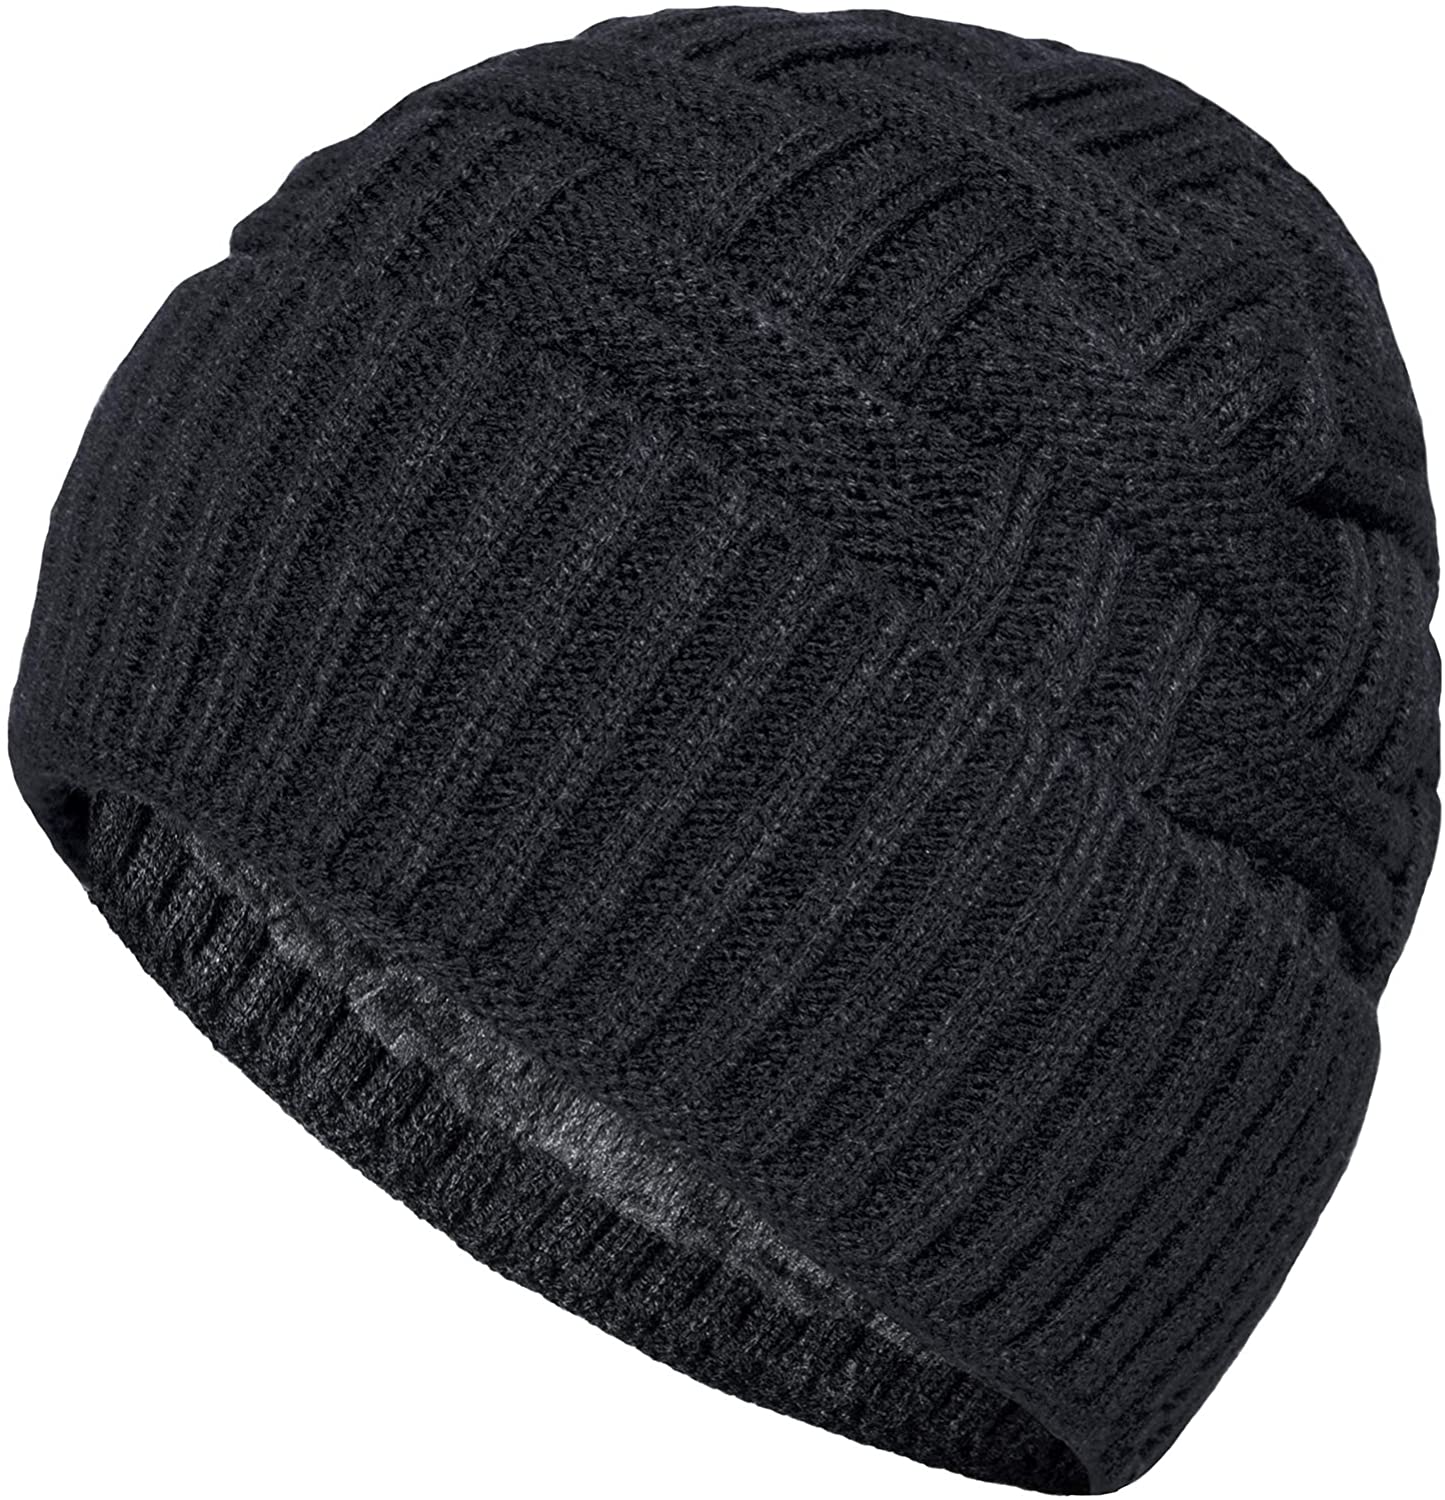 Winter Hat Warm Knitted Wool Thick Baggy Slouchy Beanie Skull Cap